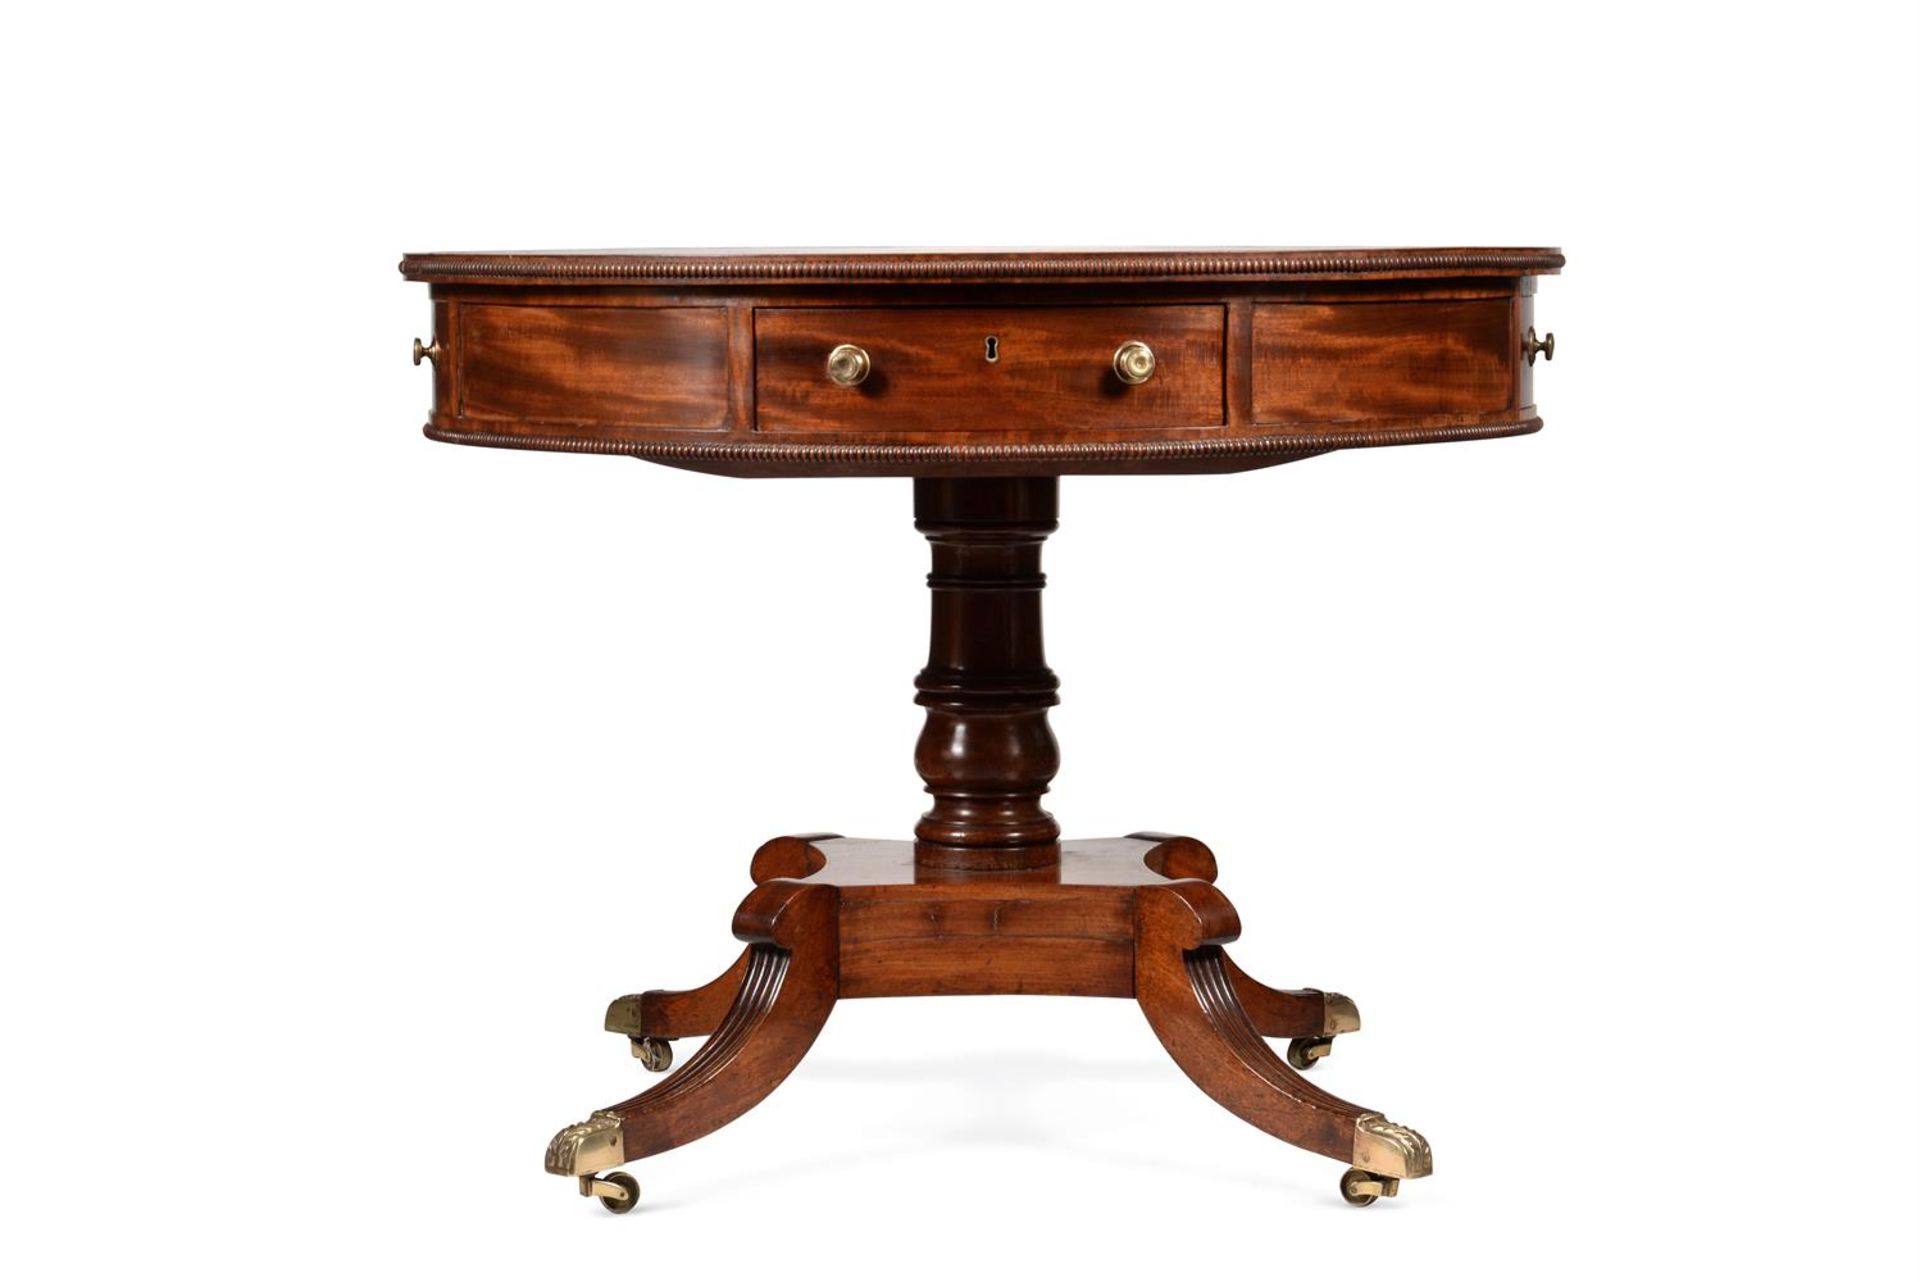 A REGENCY MAHOGANY DRUM LIBRARY TABLE, ATTRIBUTED TO GILLOWS, CIRCA 1815 - Image 2 of 5